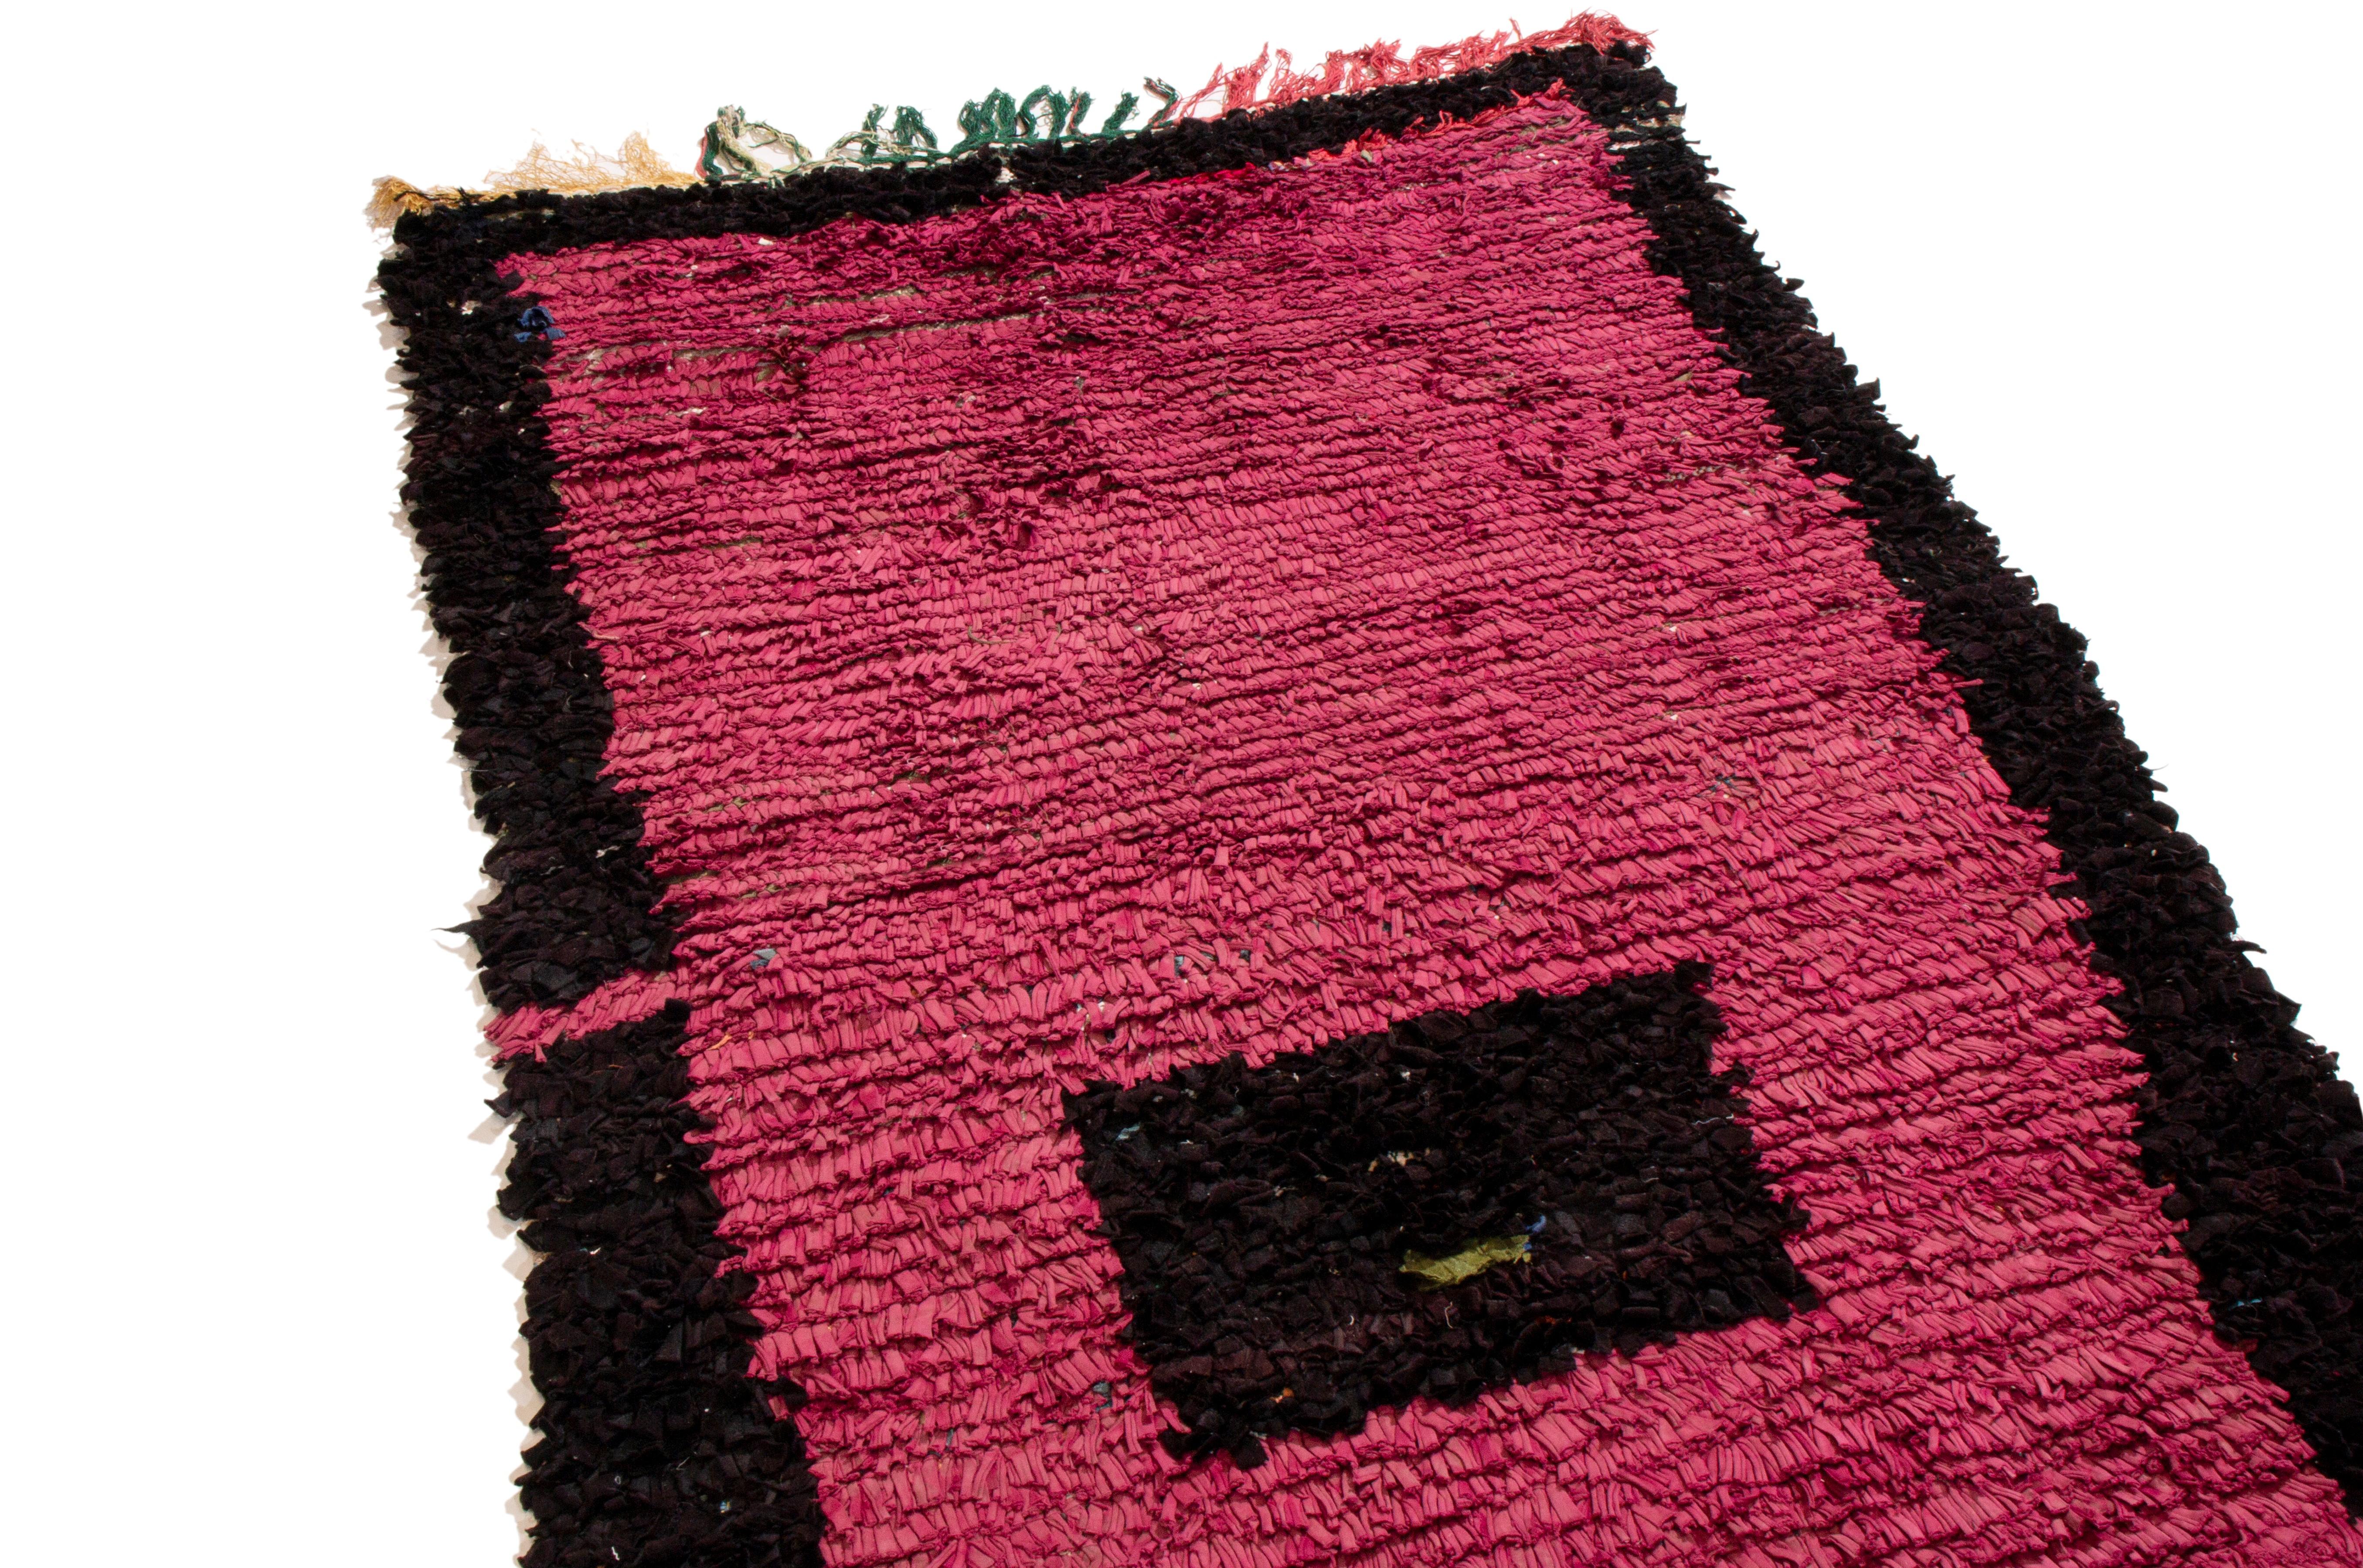 Originating from Moroccan in 1950, this vintage mid-century Moroccan wool rug features and uncommonly Minimalist transitional design with unique colorways. Hand knotted in durable textural wool pile, the combination of magenta and black colorways